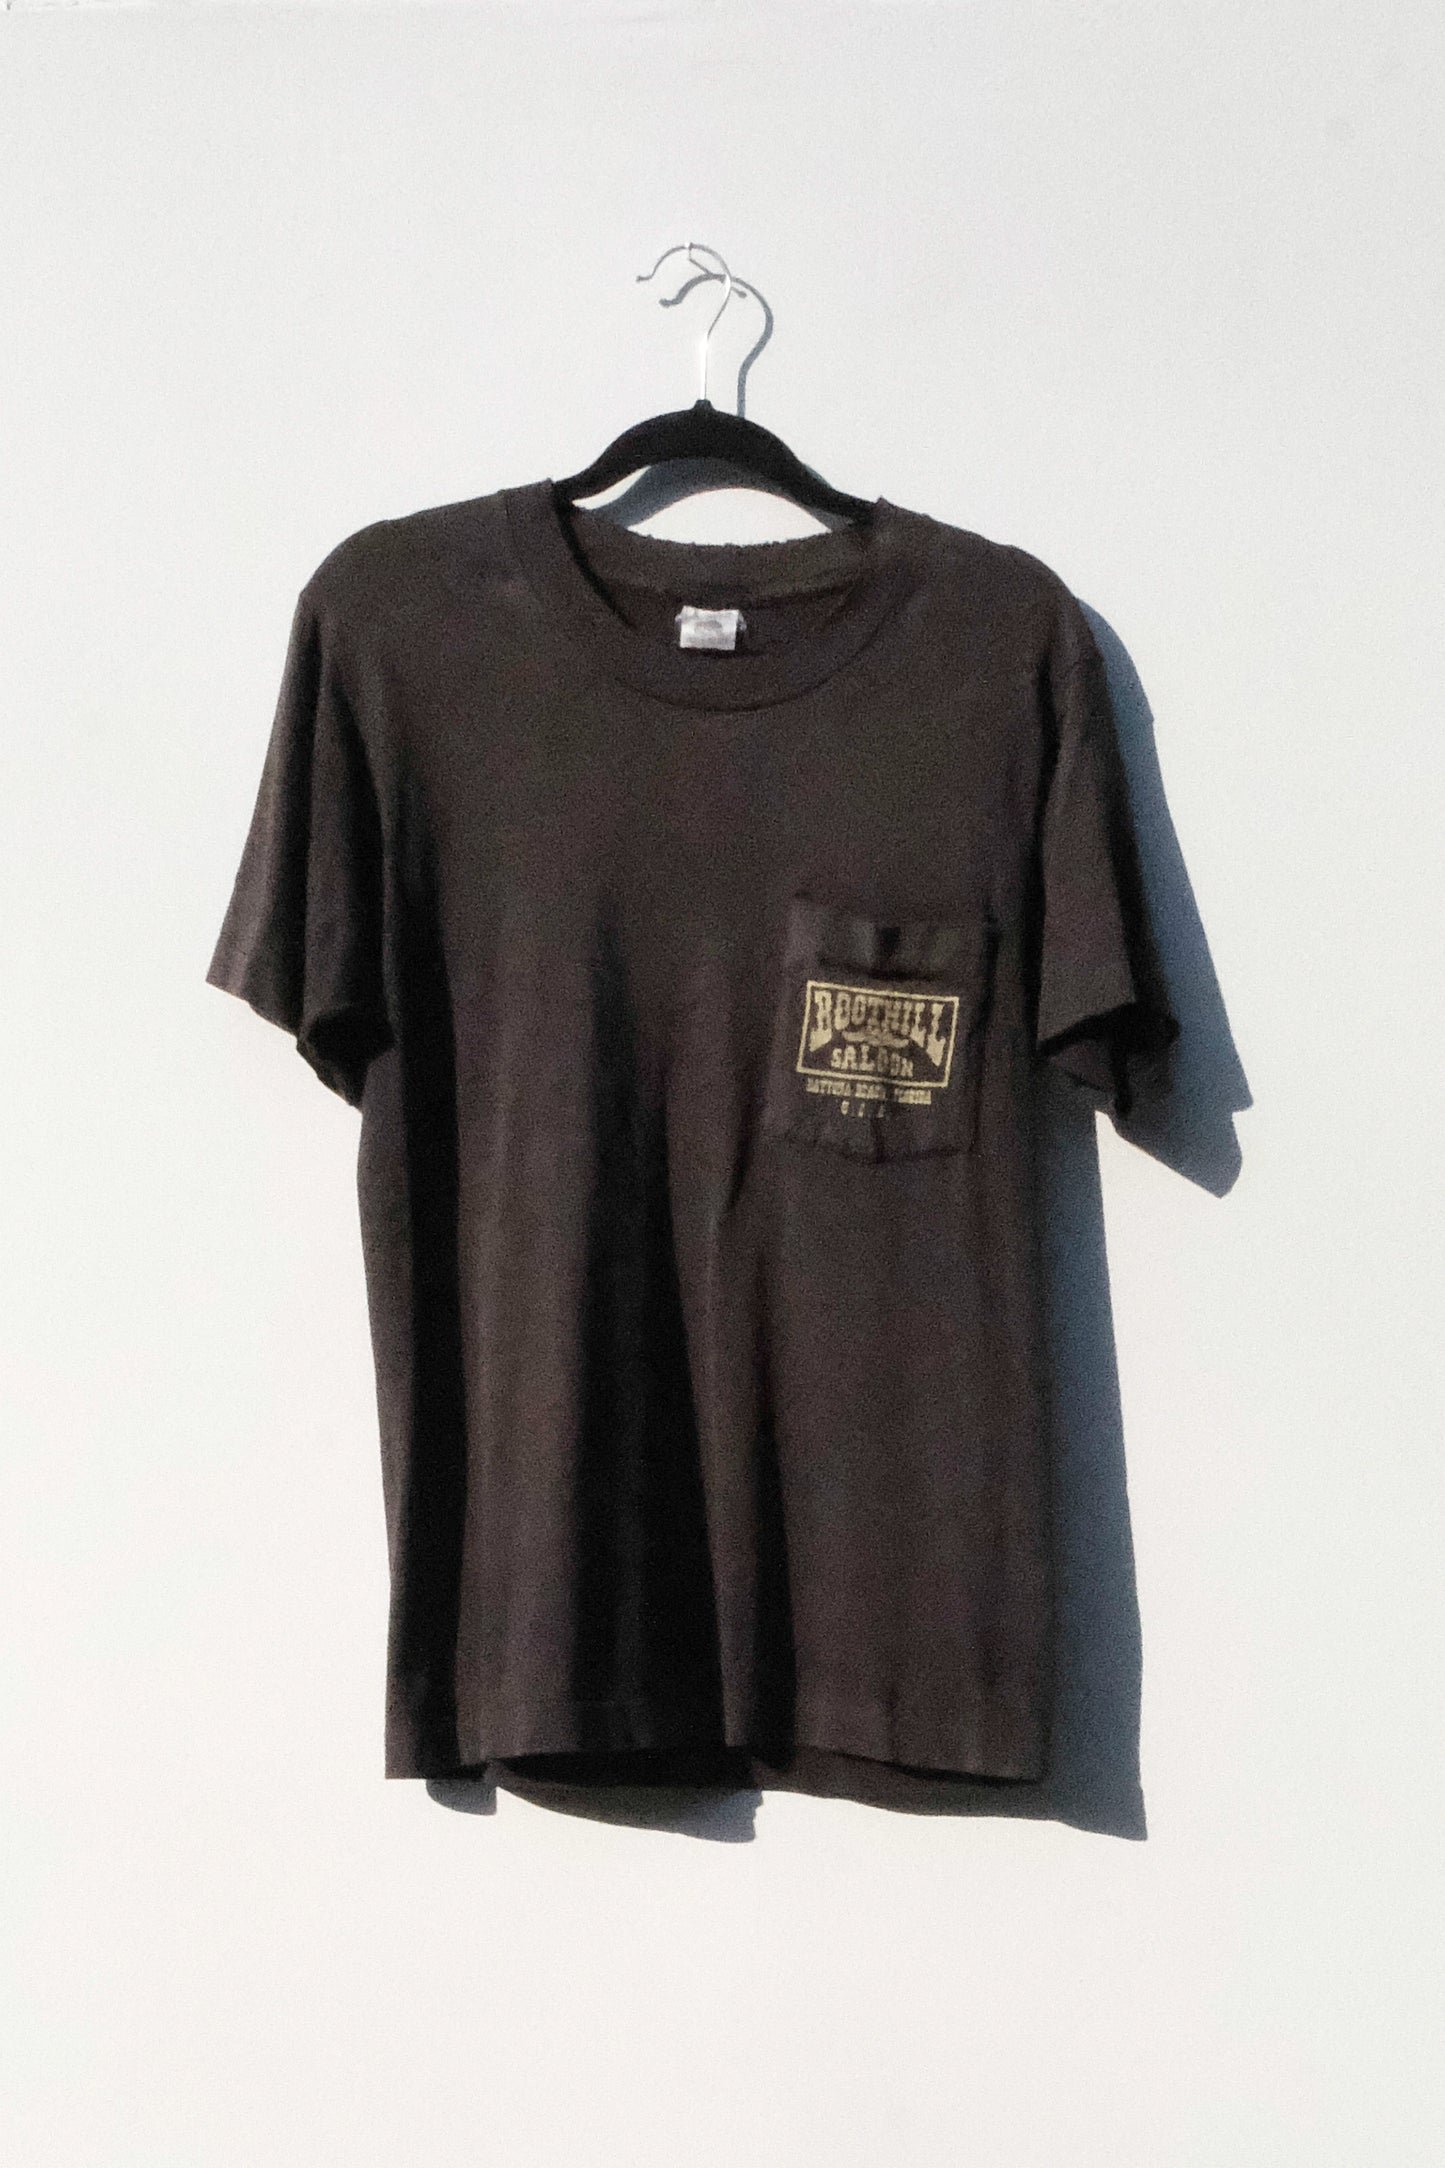 Boothill Saloon Vintage Black T-Shirt US 6, 90's Western Americana Distressed